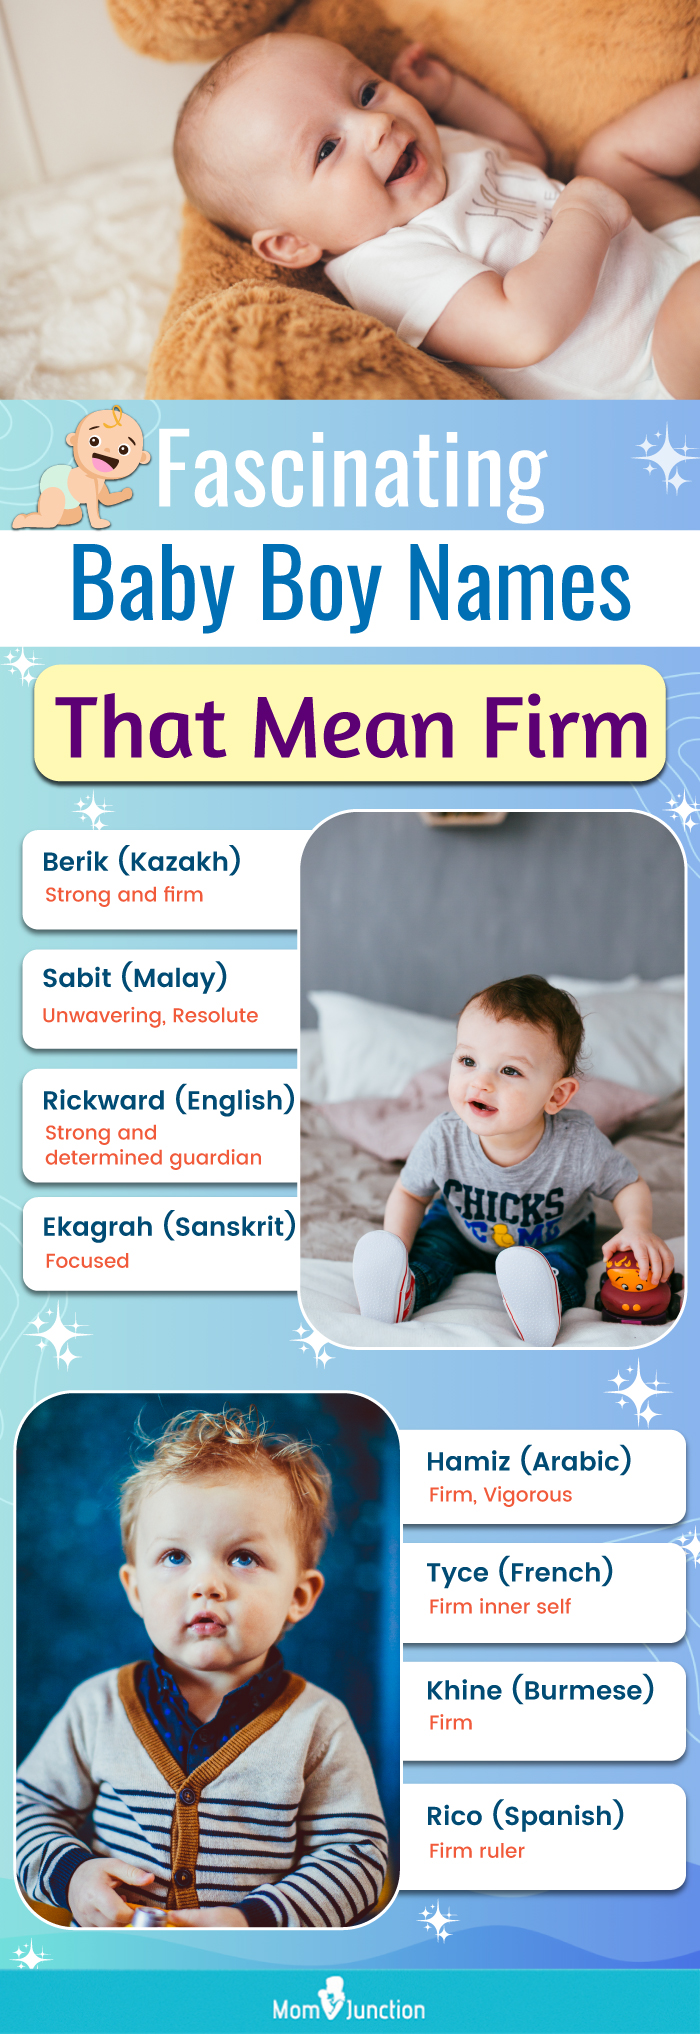 fascinating baby boy names that mean firm (infographic)